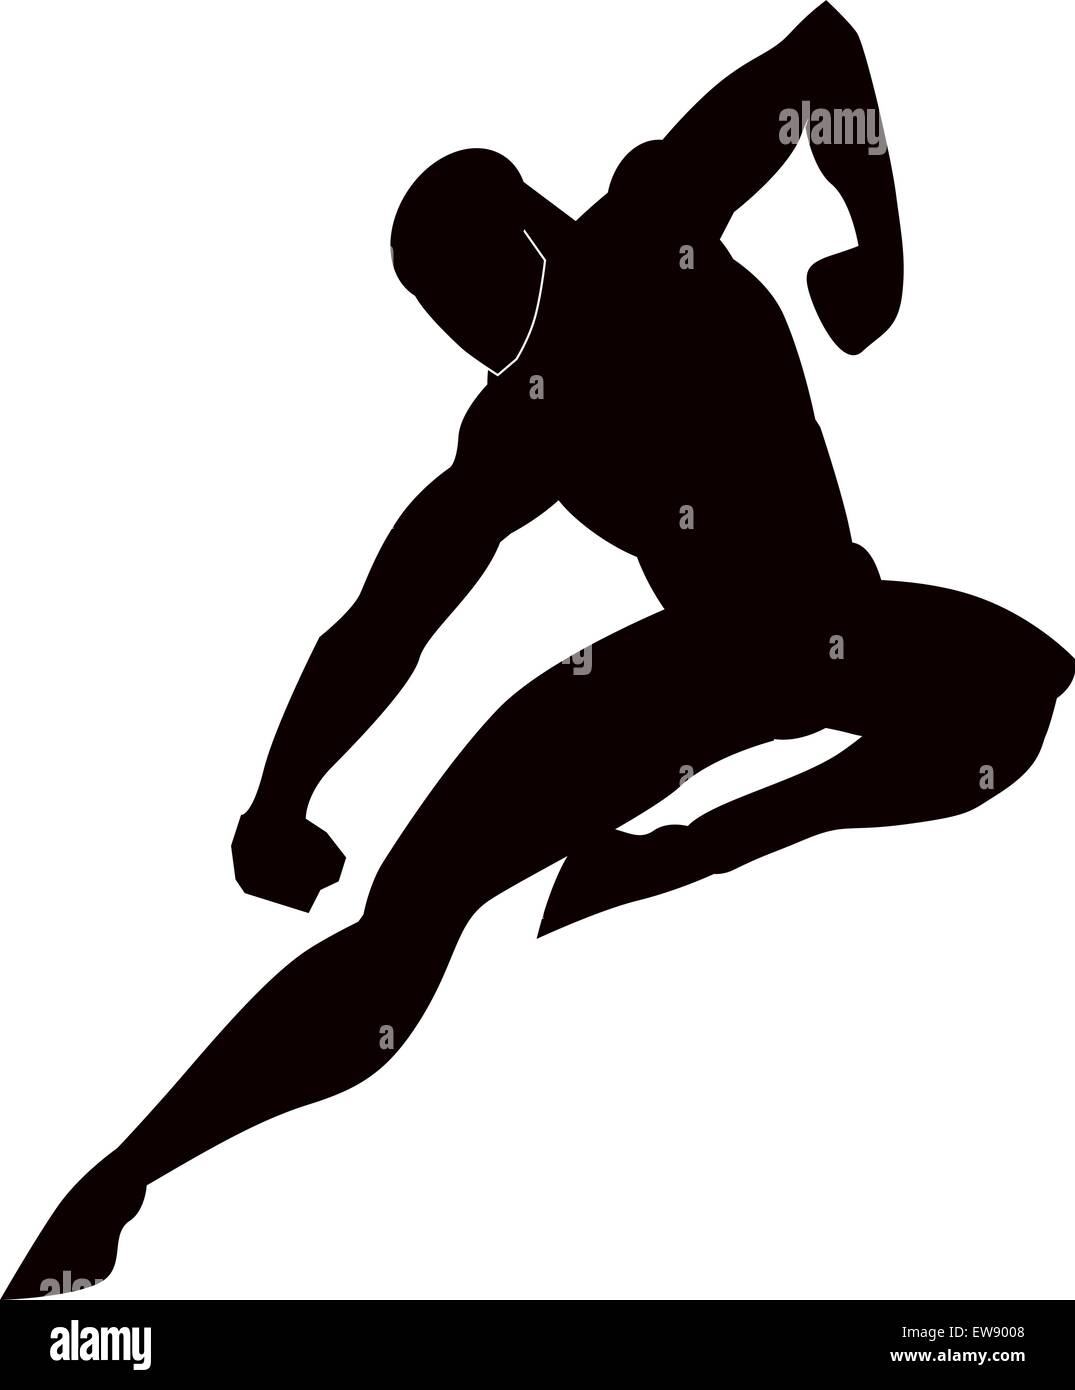 Martial Arts, Black Silhouette of a Man, Punching and Kicking, vector illustration Stock Vector